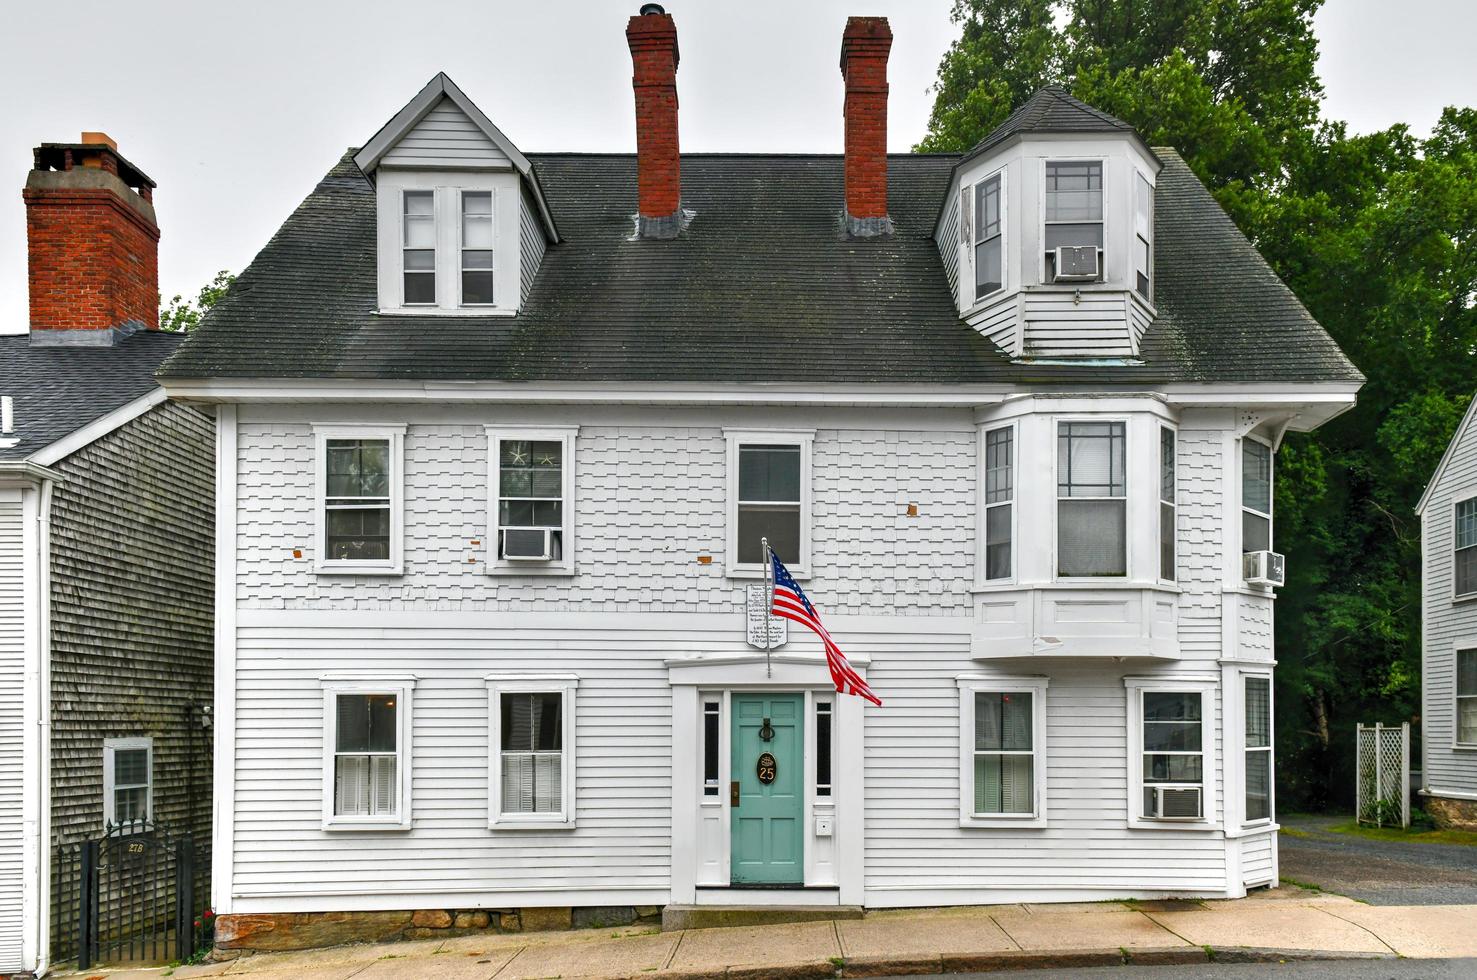 Plymouth, MA - July 3, 2020 -  Leyden Street, created in 1620 by the Pilgrims, and claims to be the oldest continuously inhabited street in the thirteen colonies of British North America. photo